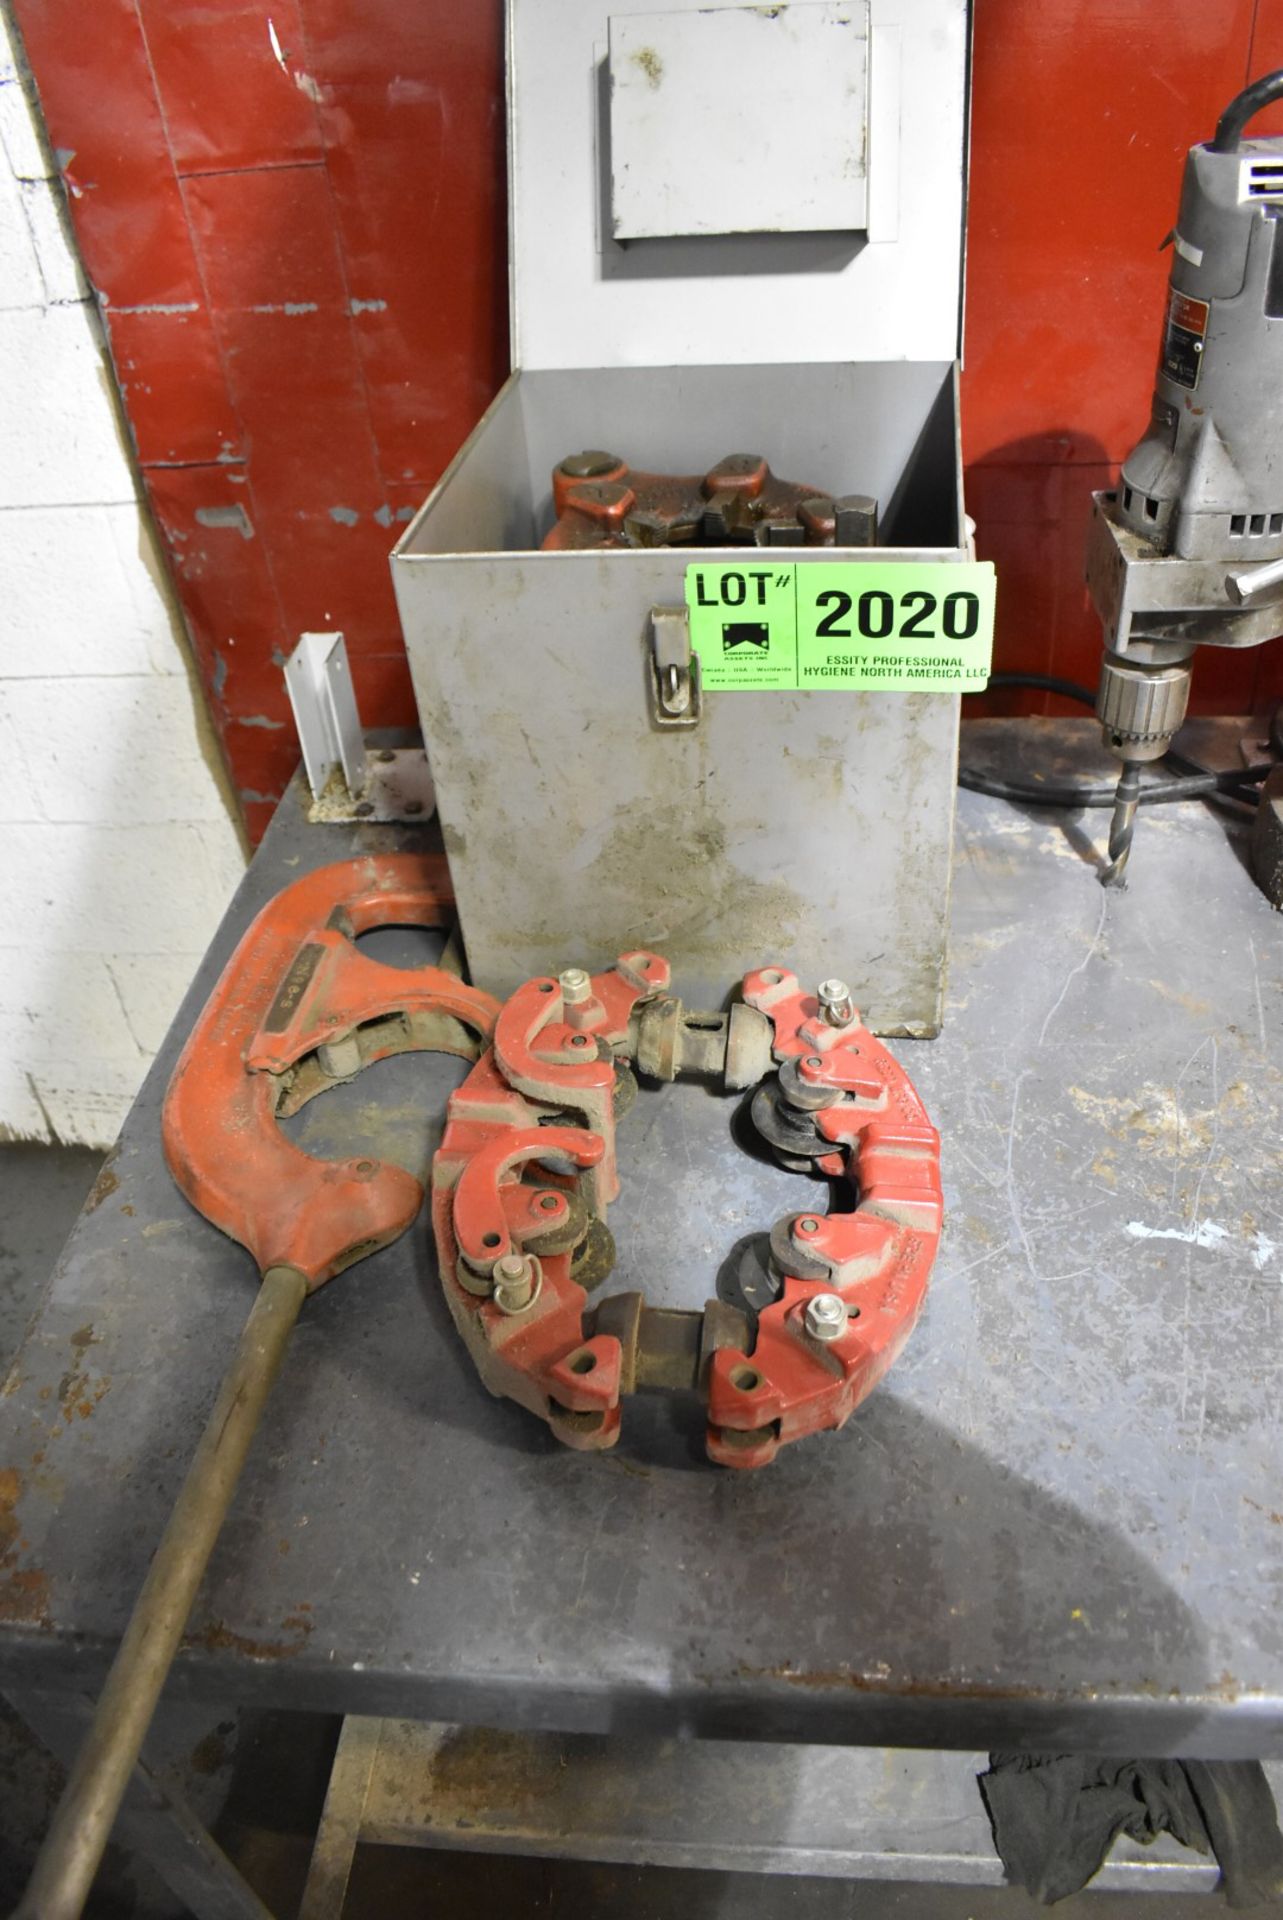 LOT/ RIDGID PIPE CUTTERS AND THREADING DIES [RIGGING FEES FOR LOT #2020 - $50 USD PLUS APPLICABLE